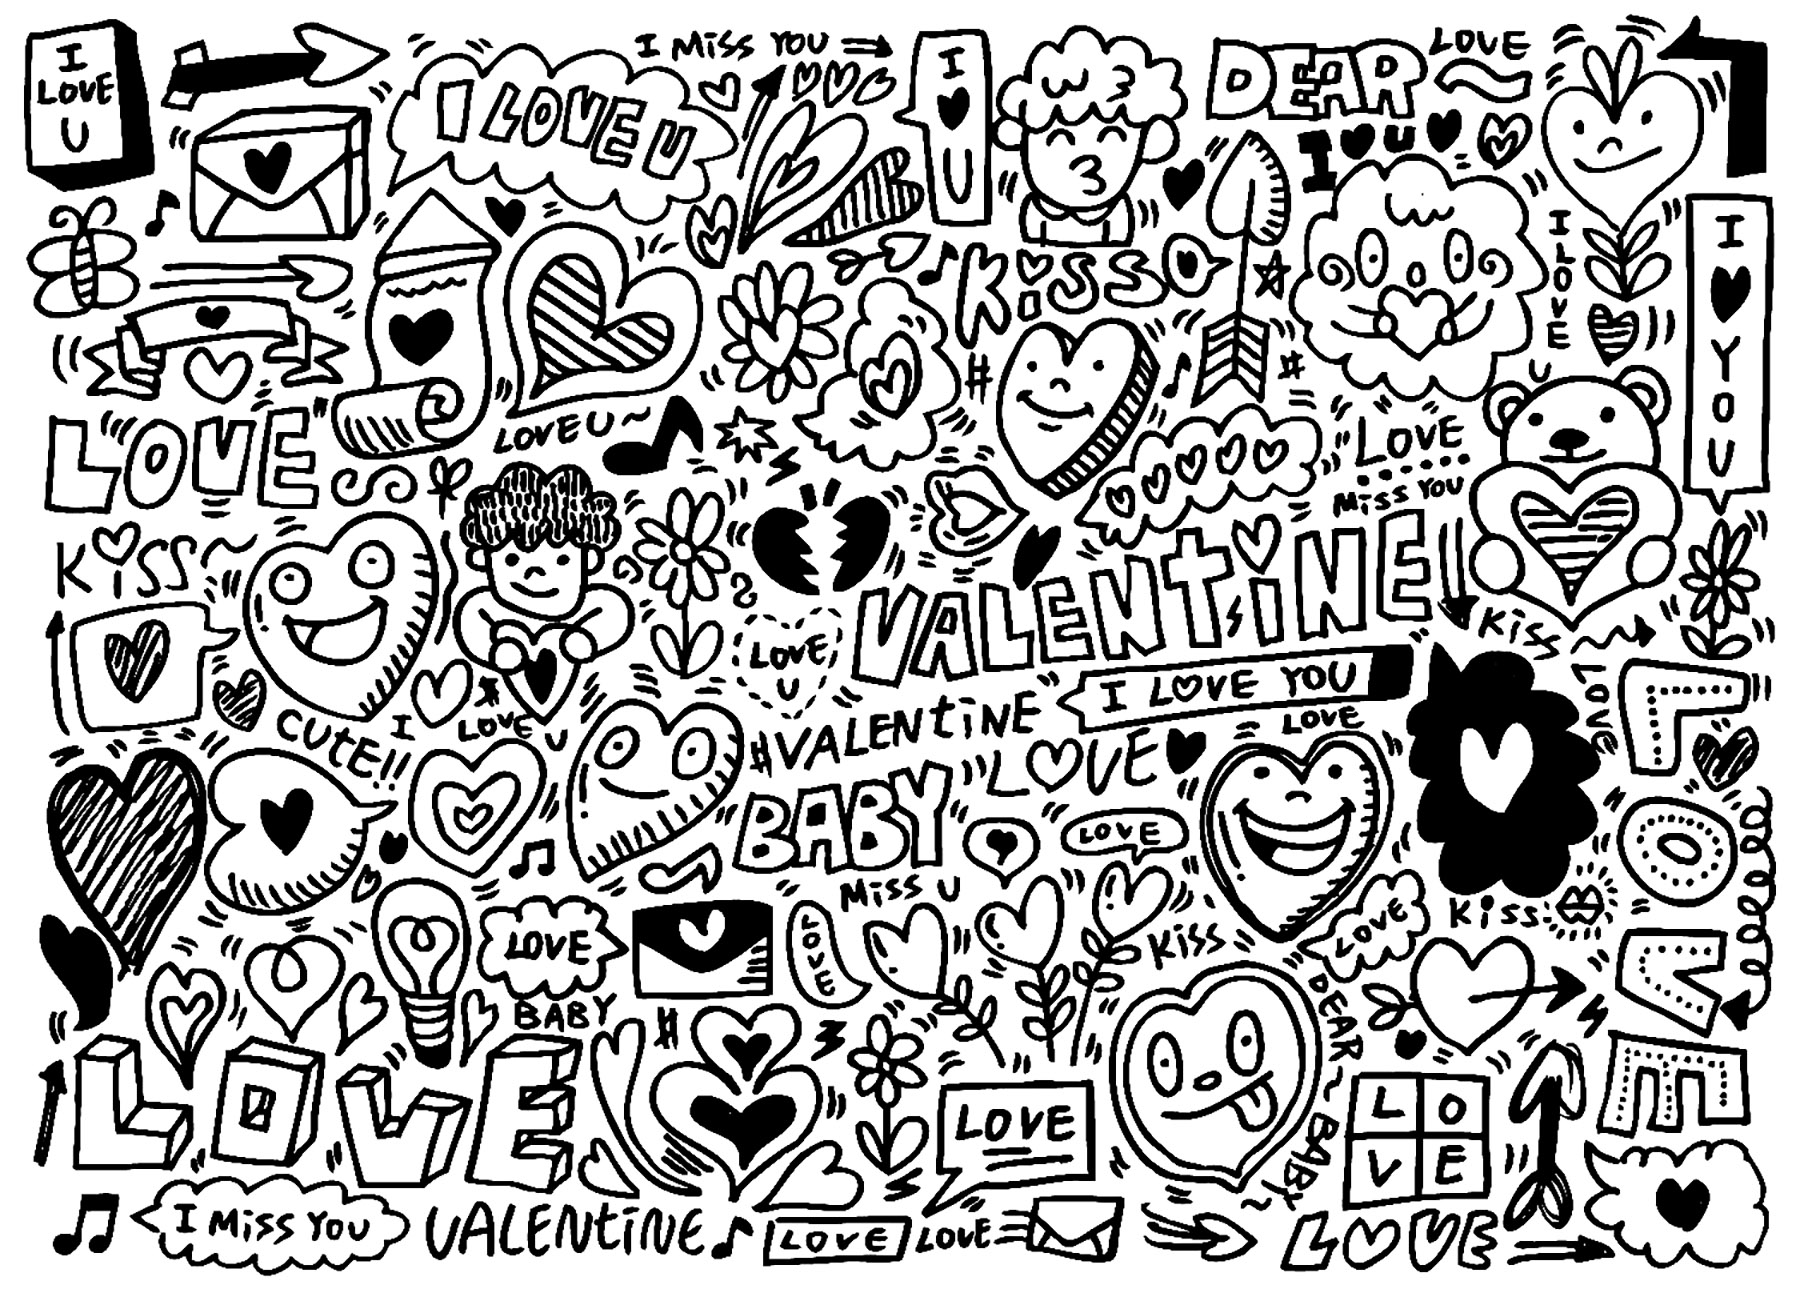 Love & Valentine's Day Doodle Coloring page